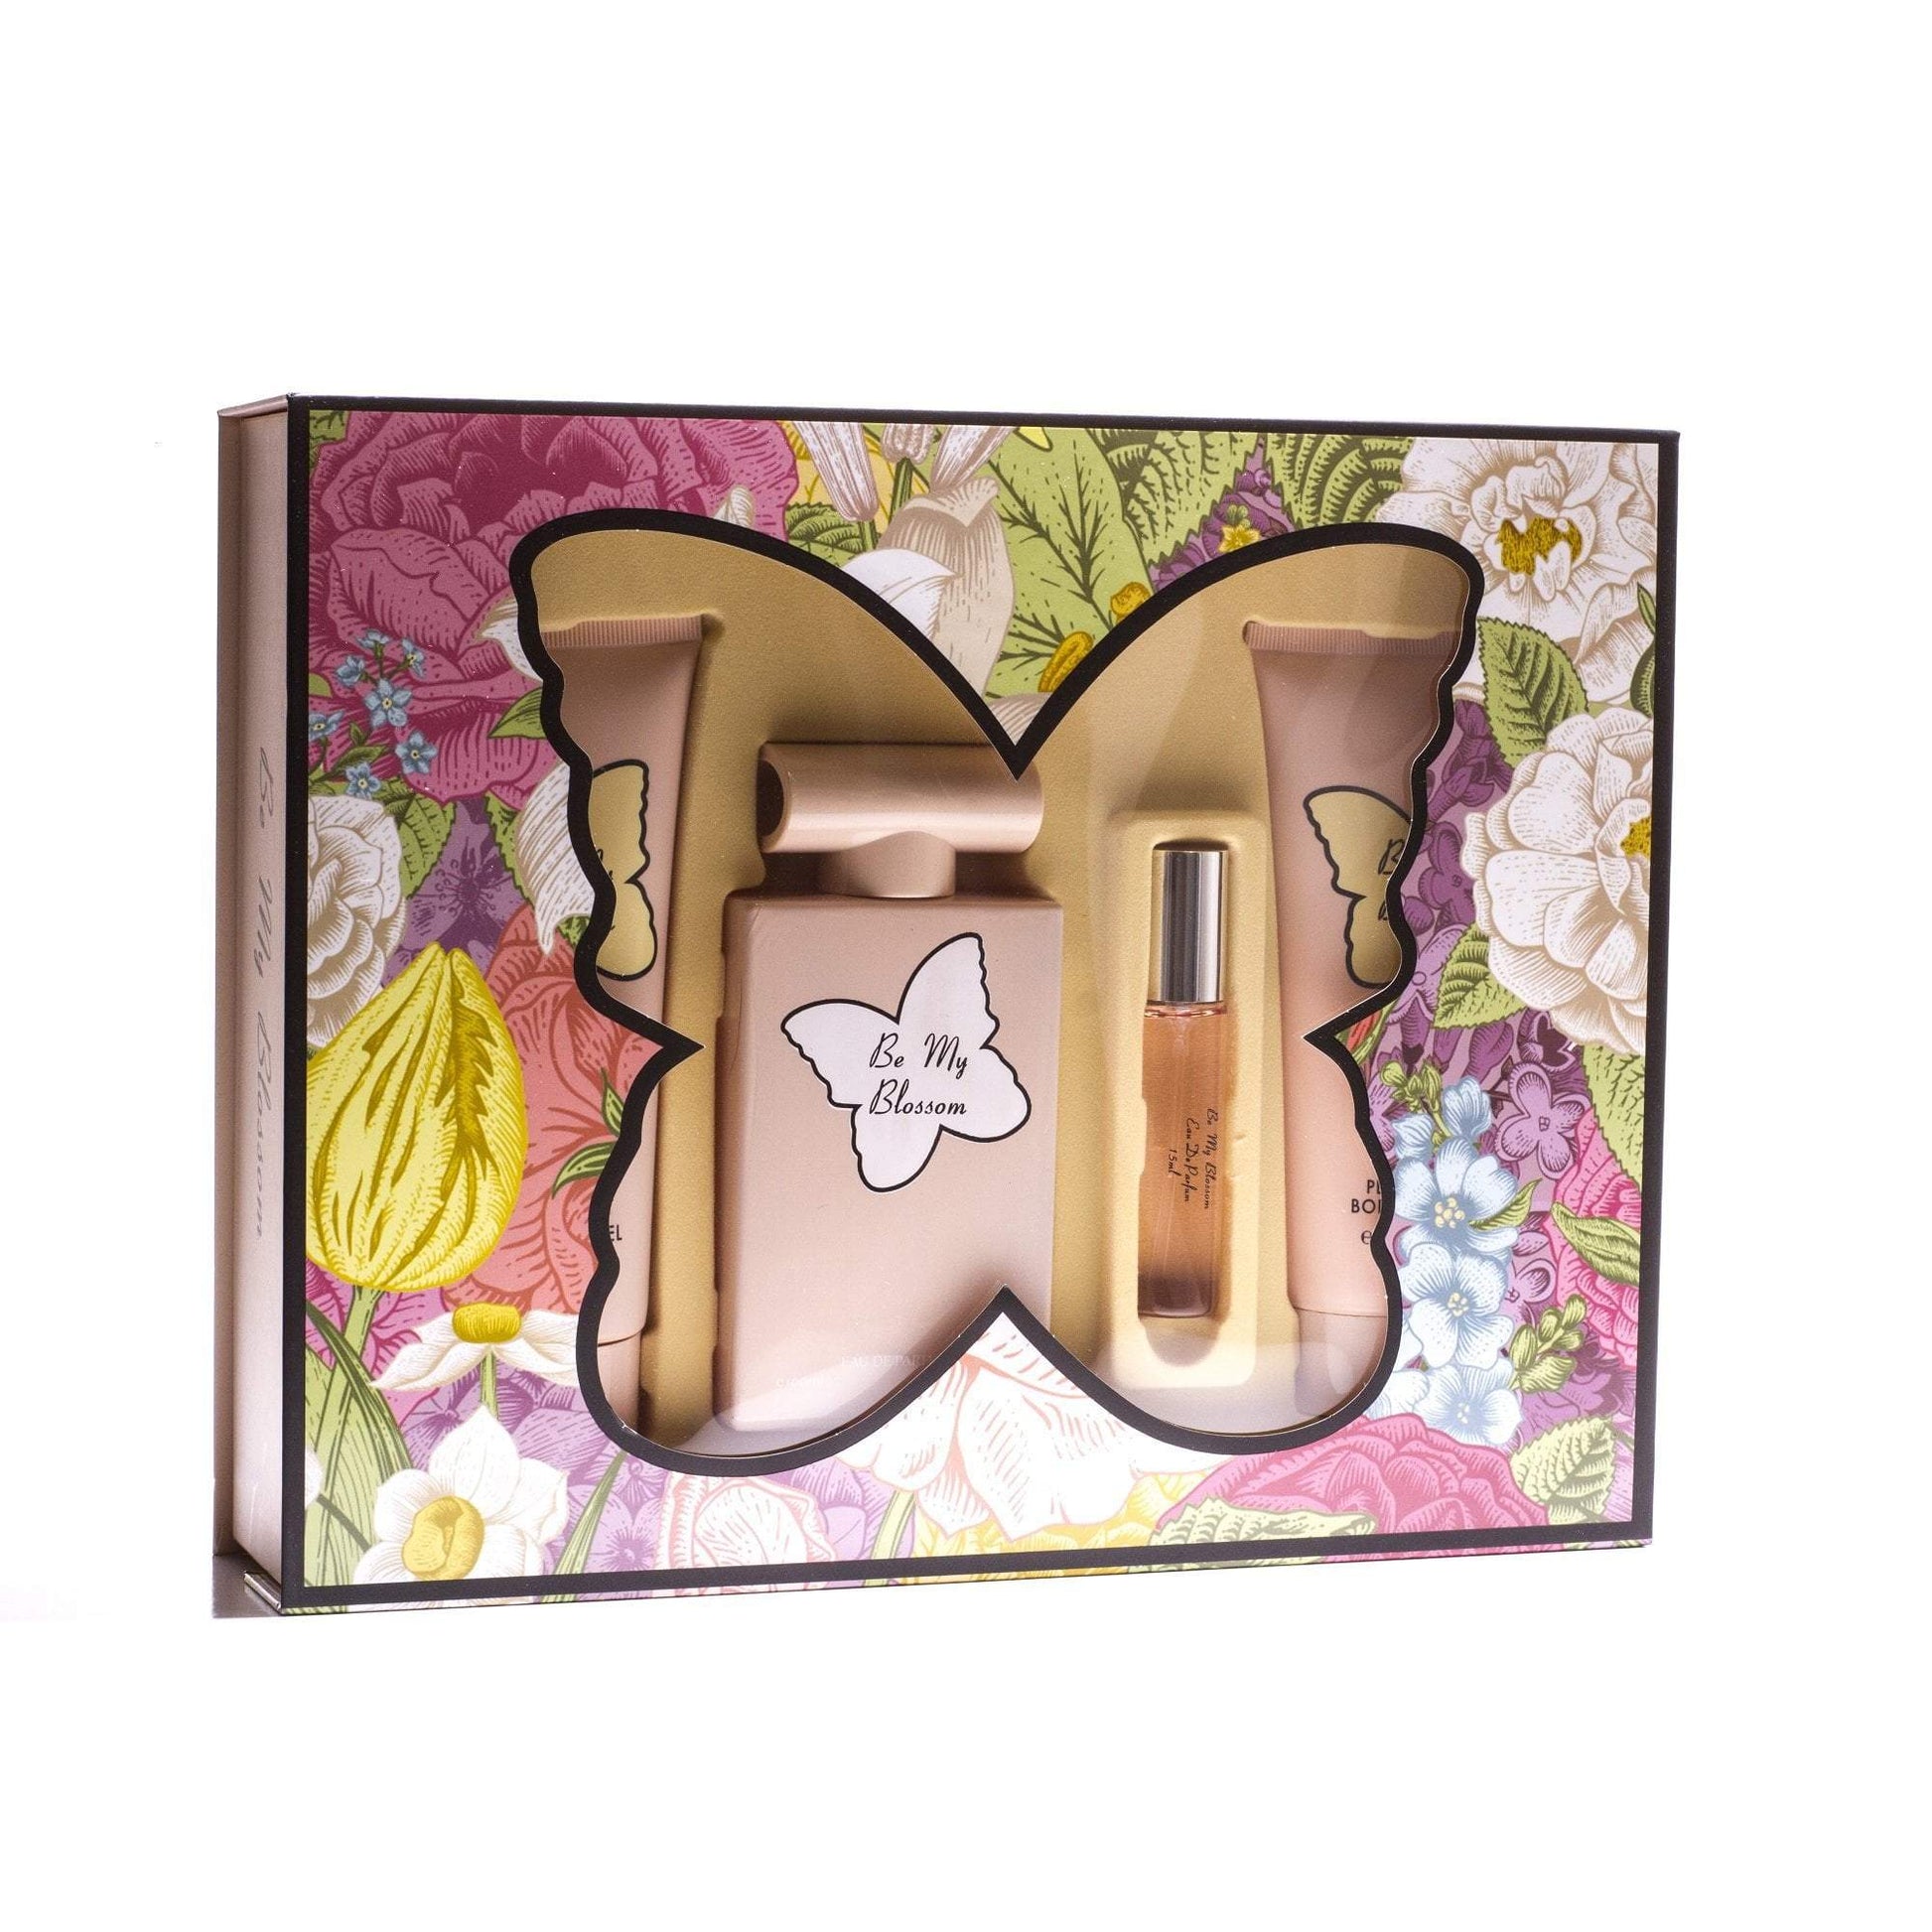 Be My Blossom Gift Set for Women 3.4 oz. Click to open in modal